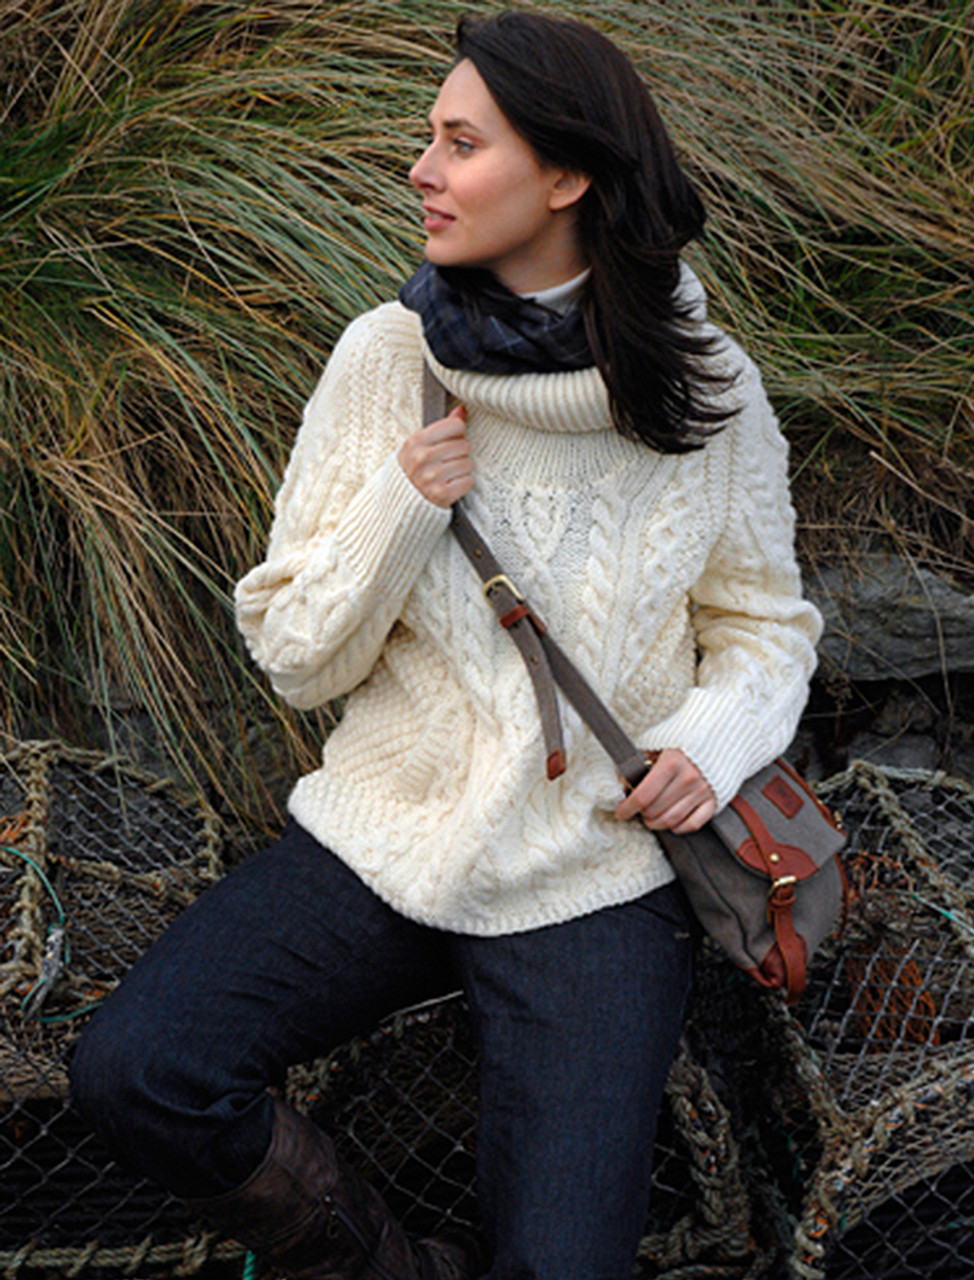 Cowl Neck Sweater with Pockets